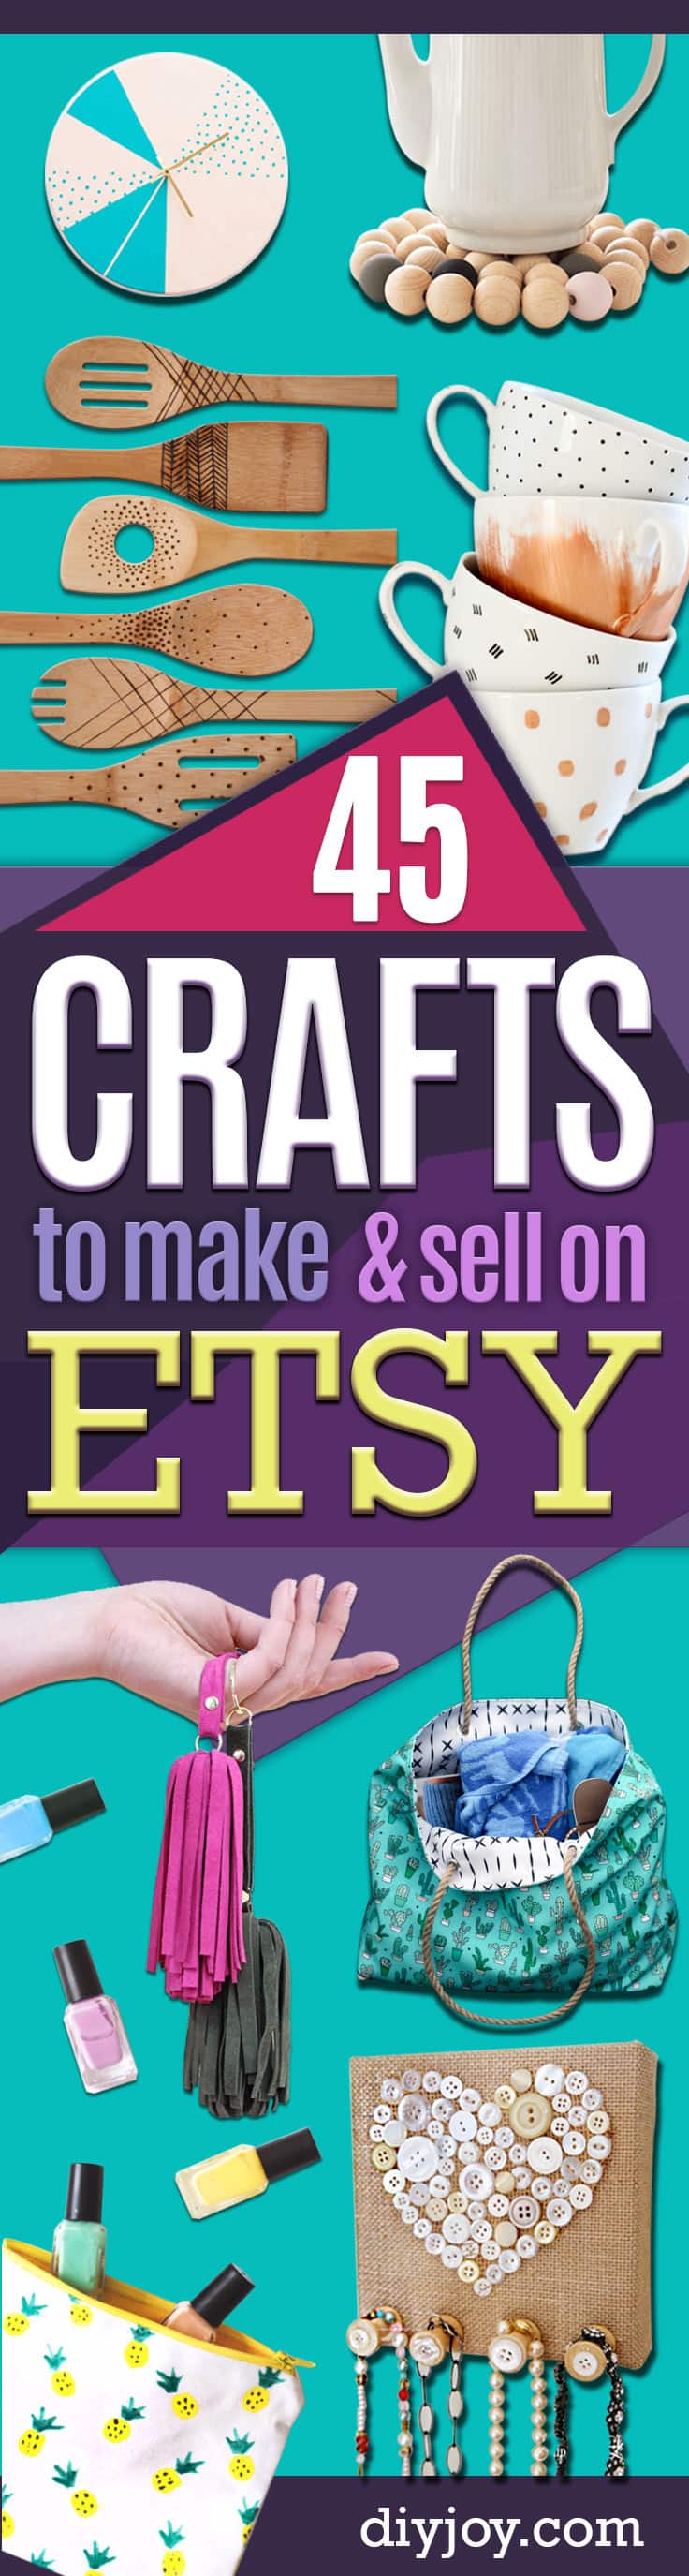 DIY Projects to Make and Sell on Etsy Ideas - Cheap Etsy Crafts to Make and Sell in Etsy Shops - Sell Easy Craft Ideas For Money - Best Things to Sell on Etsy